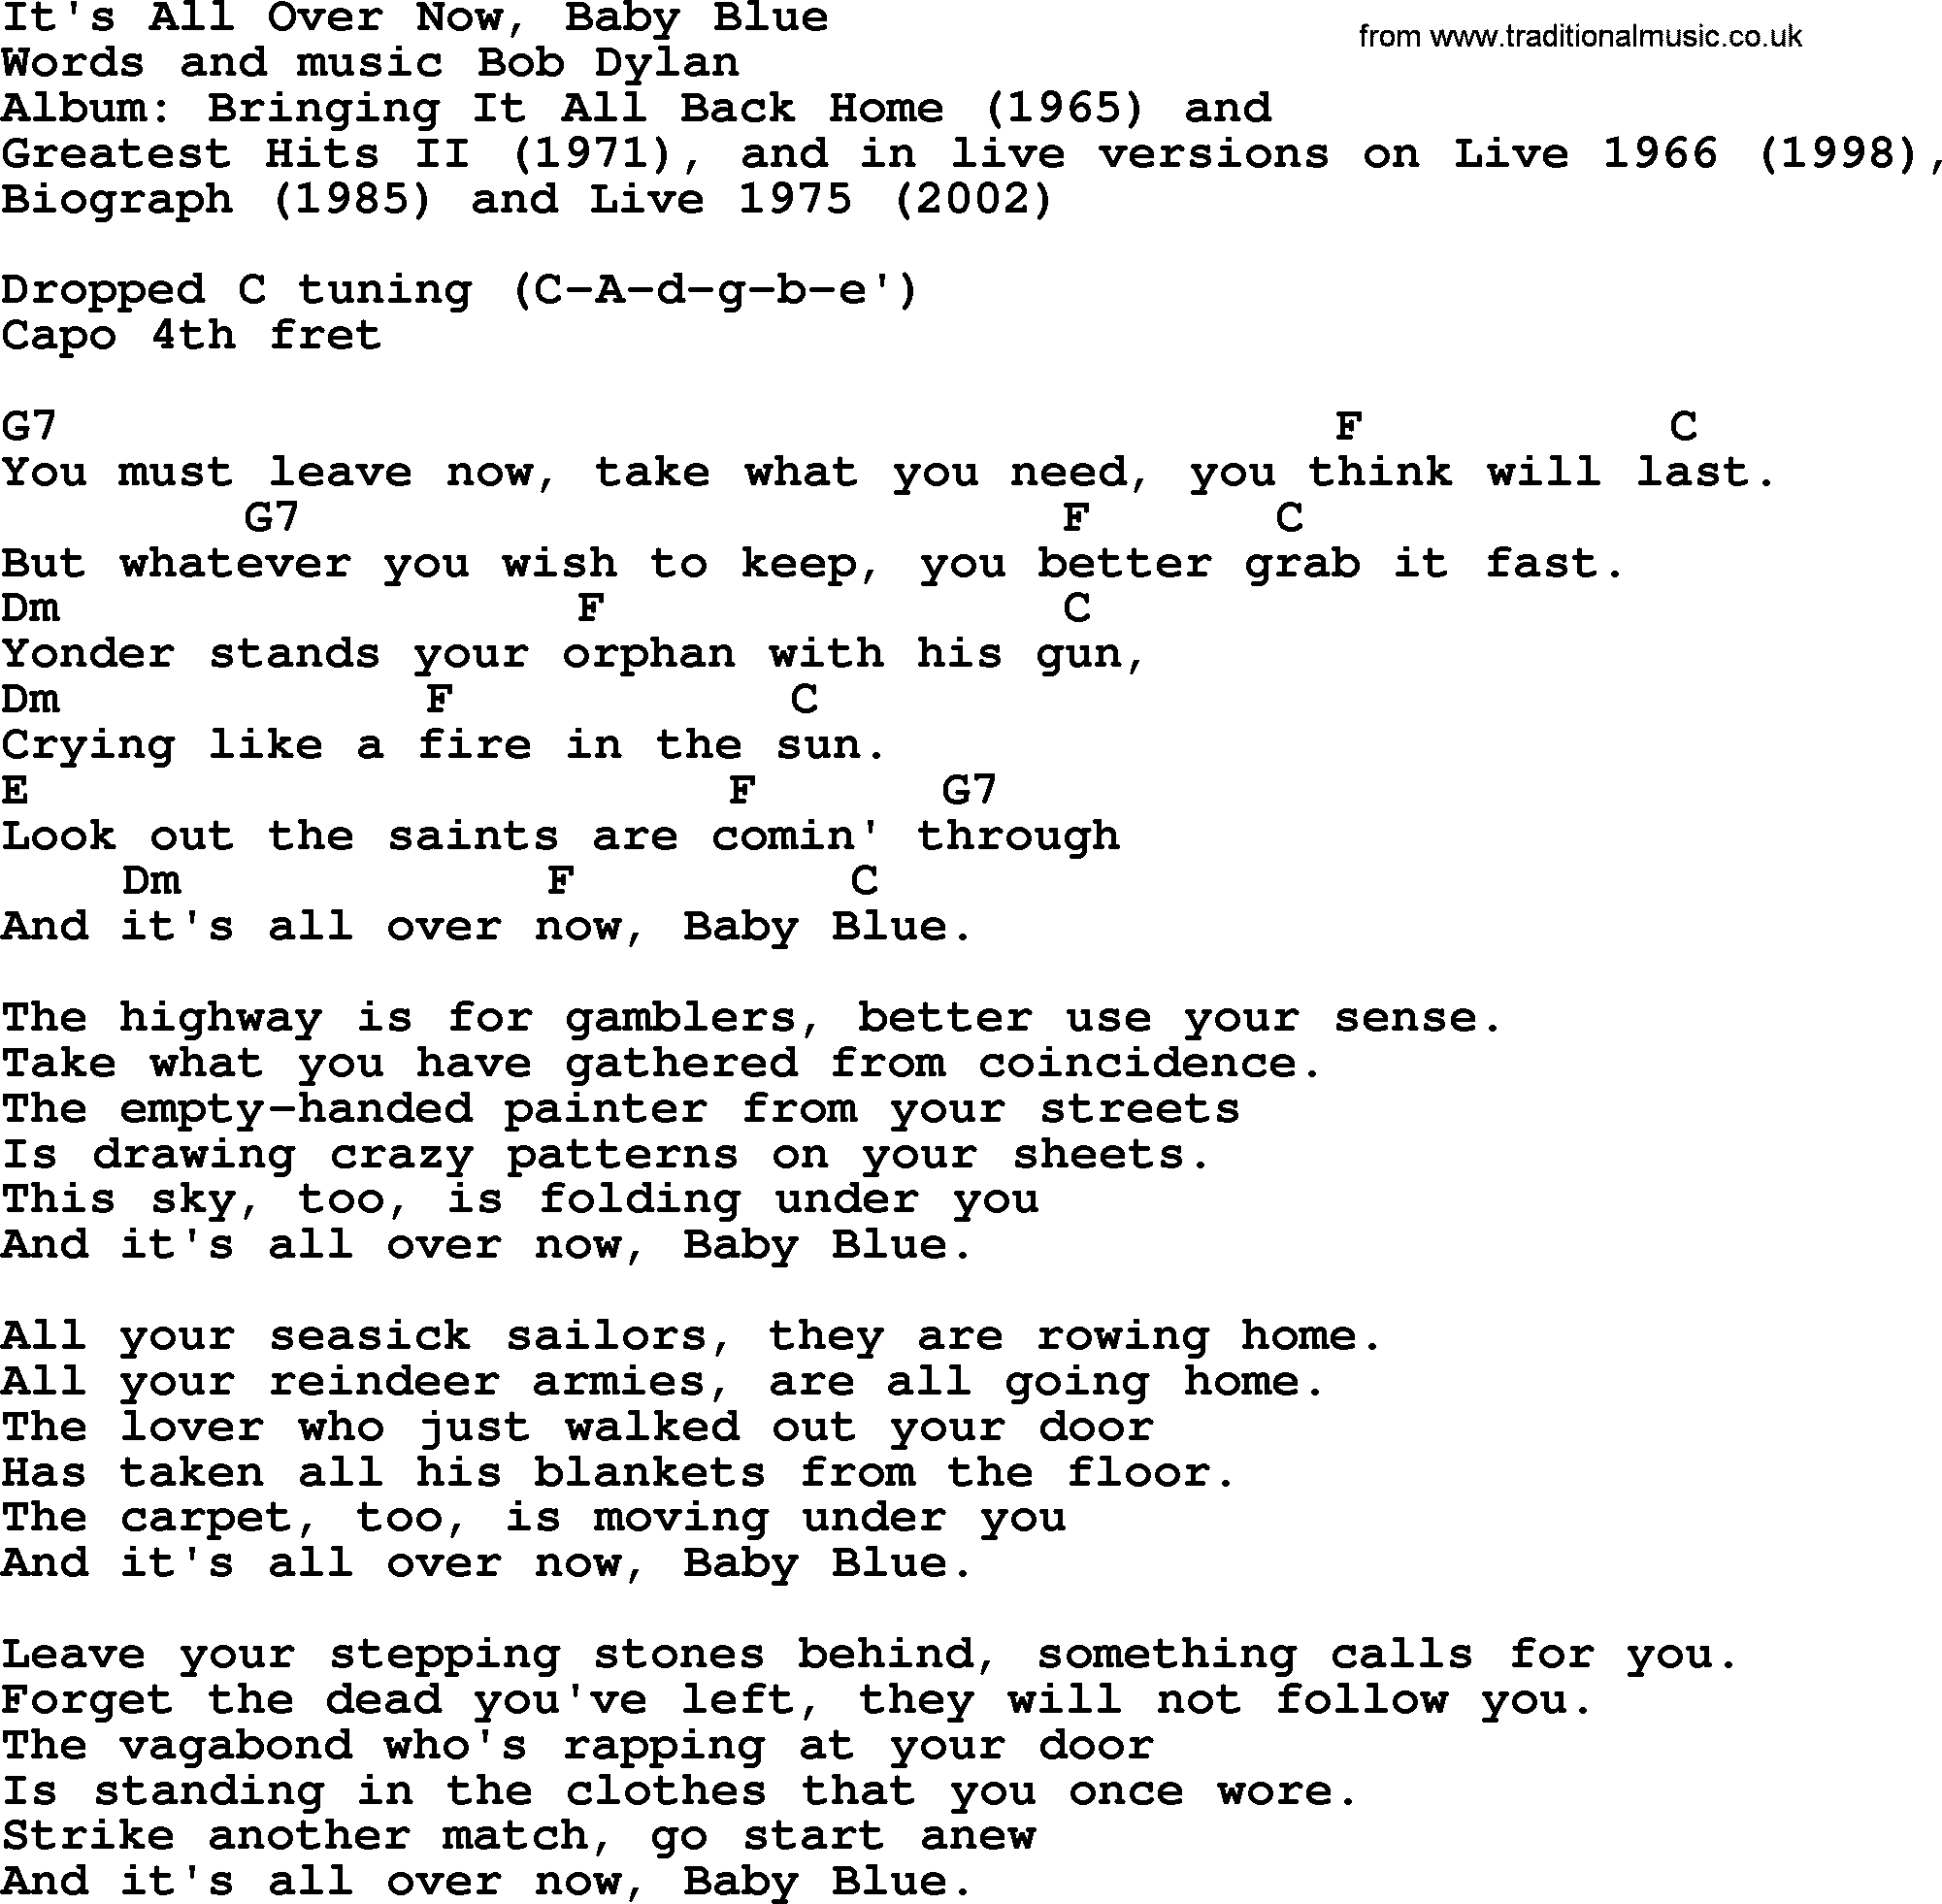 Bob Dylan song, lyrics with chords - It's All Over Now, Baby Blue